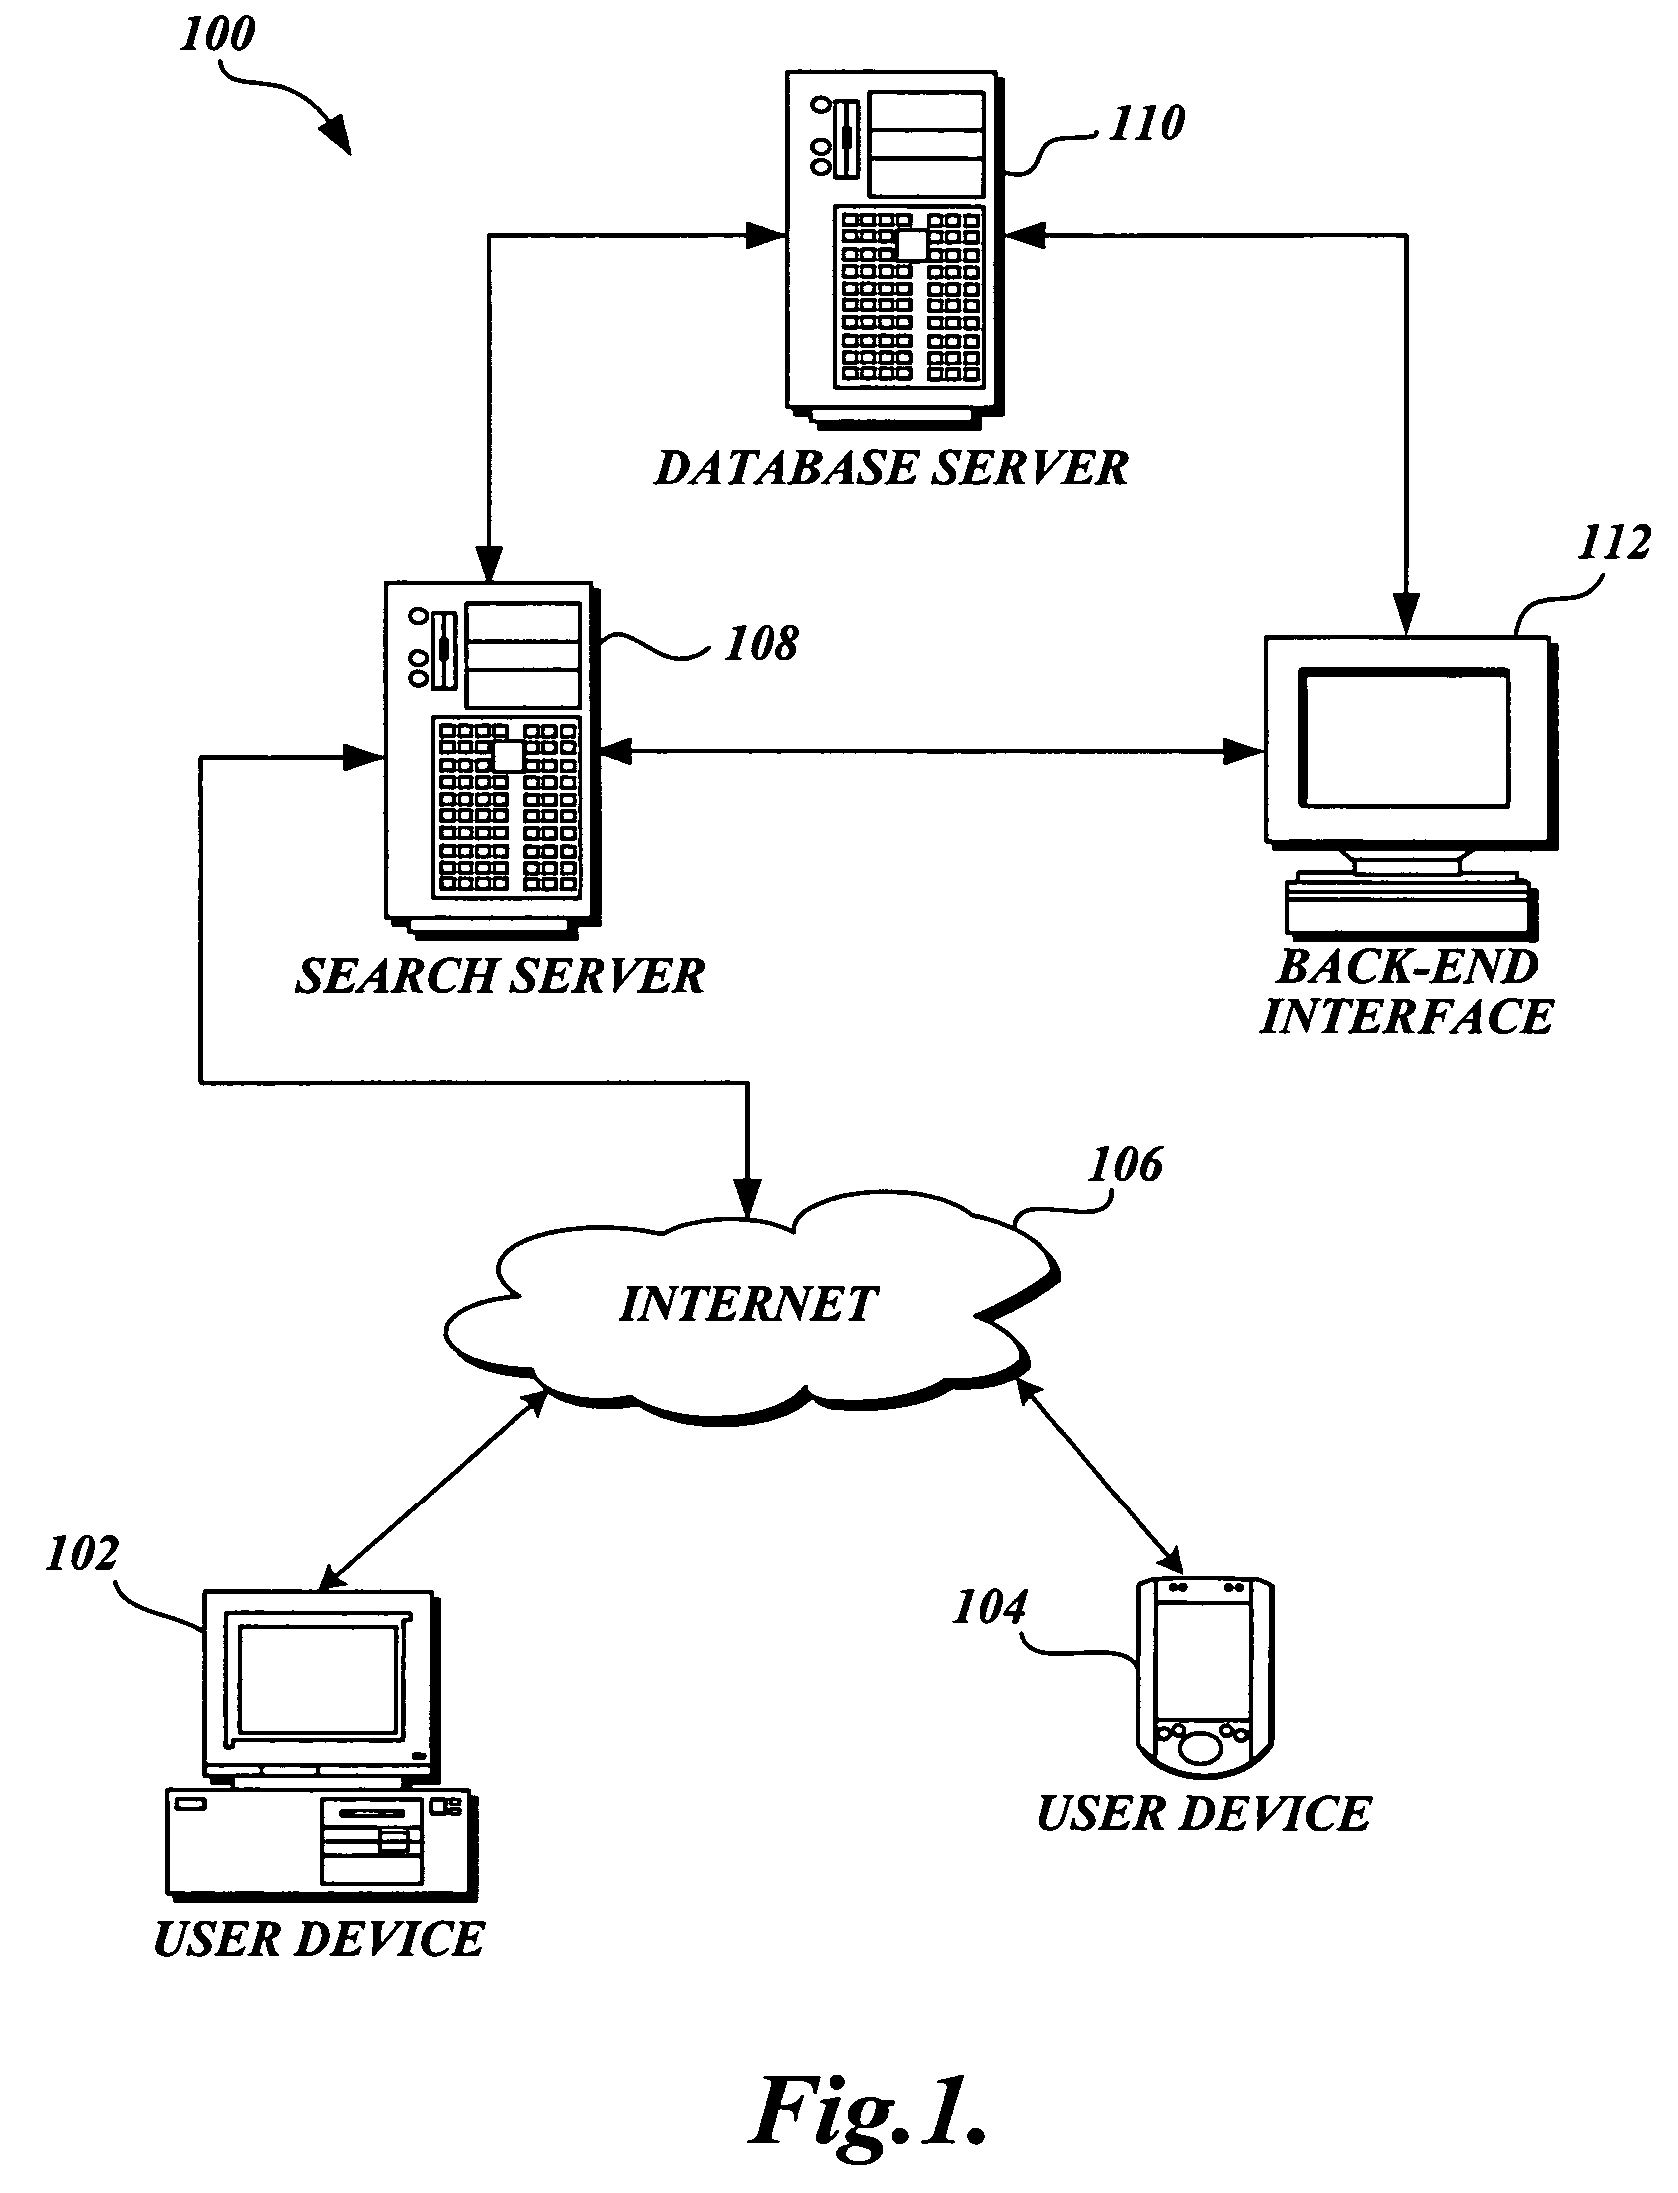 Method and system for access to electronic images of text based on user ownership of corresponding physical text